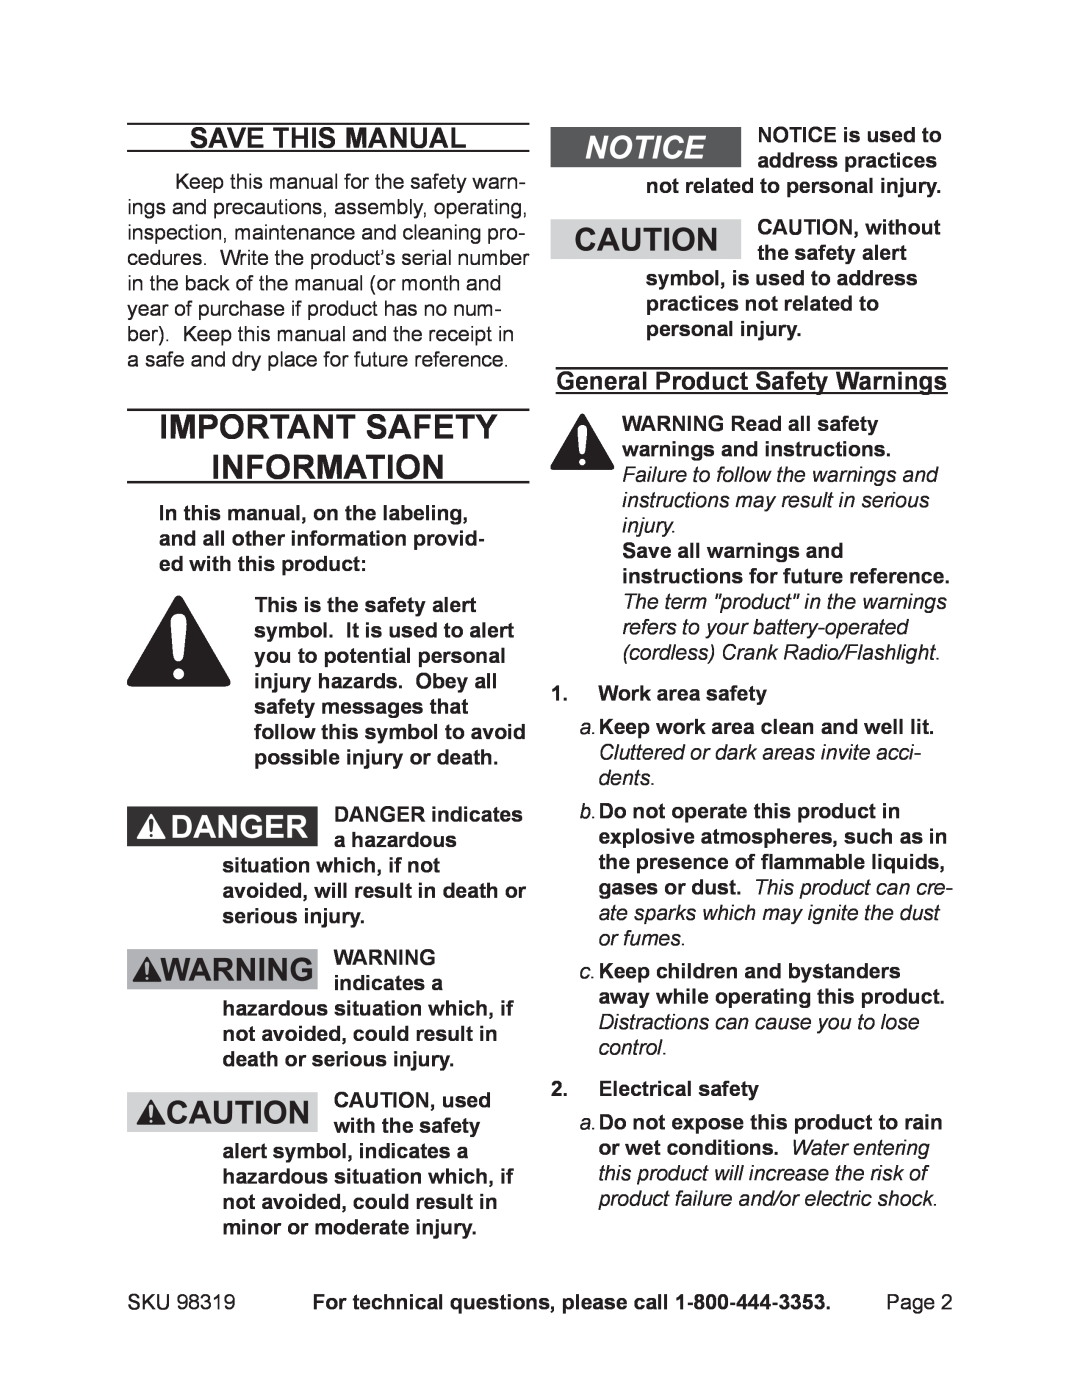 Harbor Freight Tools 98319 manual Important SAFETY Information, Save This Manual, General Product Safety Warnings 